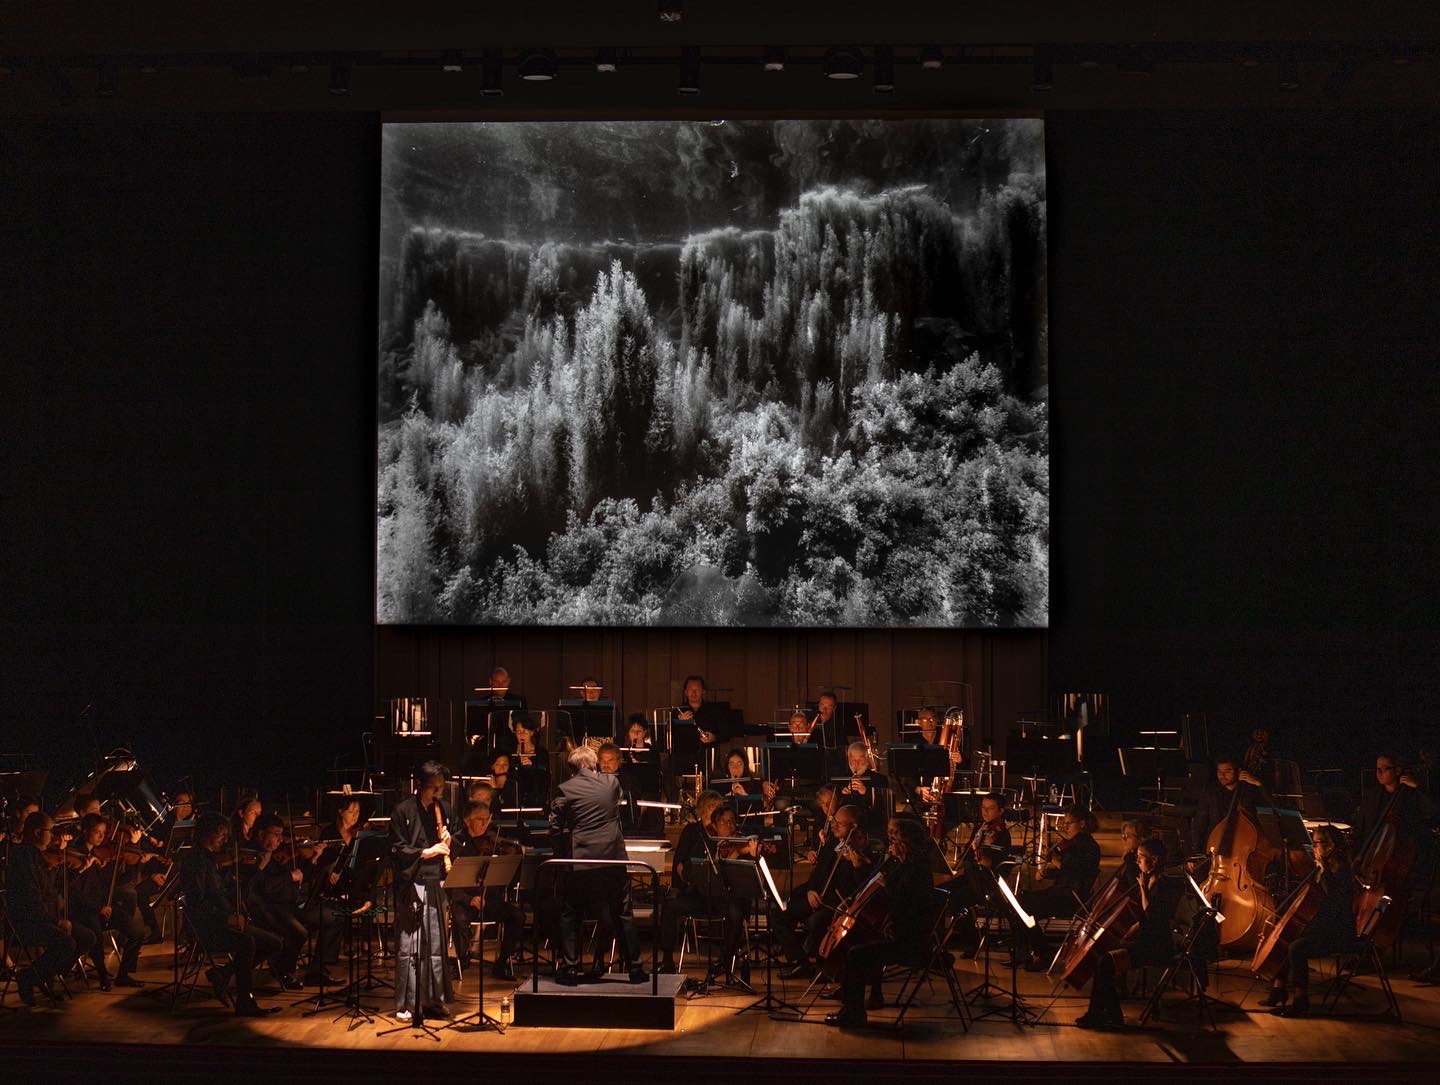 THE SOUND WORLDS OF THE OCEAN – WITH THE NATIONAL ORCHESTRA OF BRETAGNE